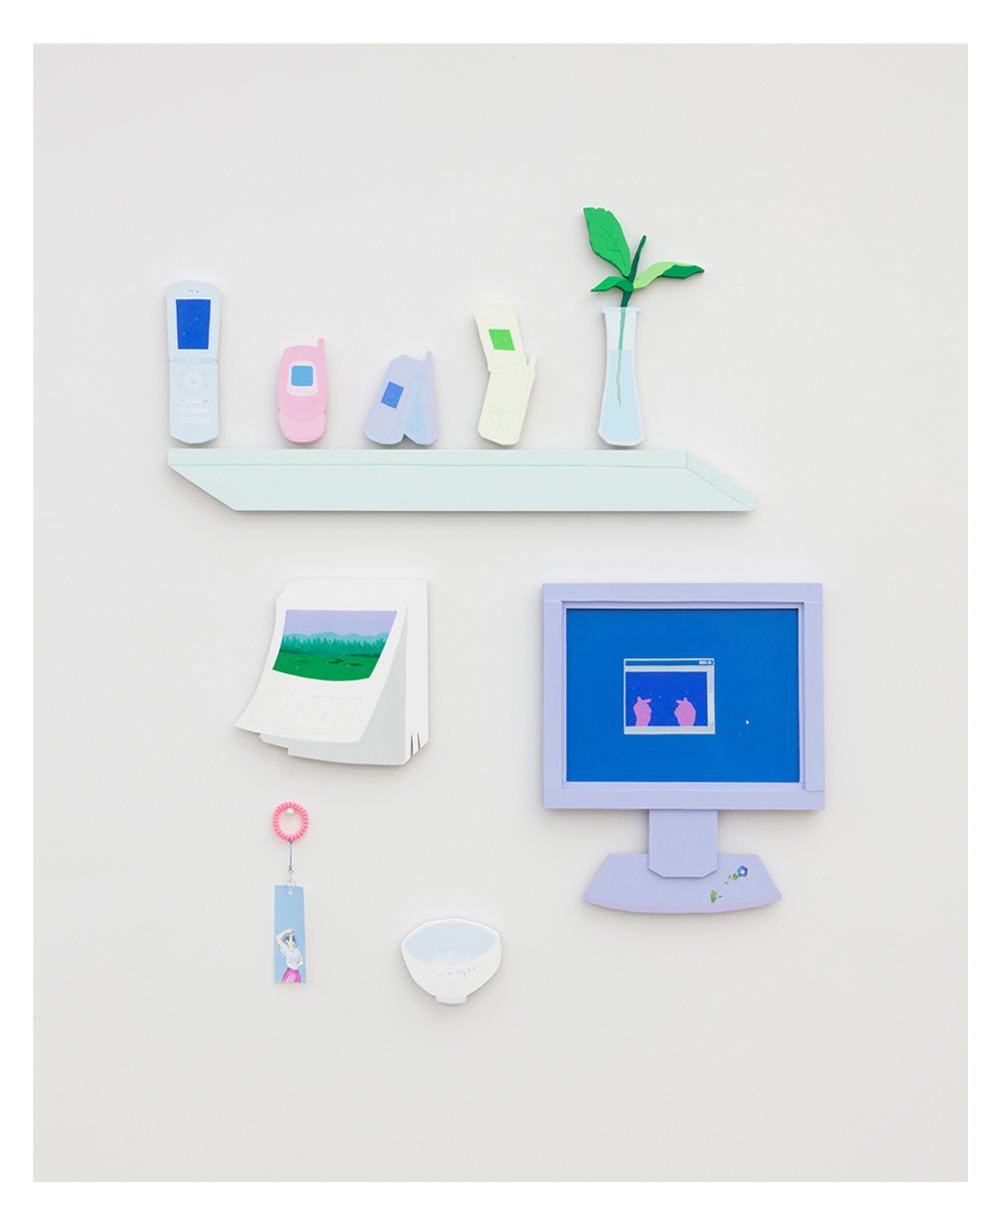 On the top there is a row of pastel colored flip phones and a vase with a green plant init, below that there is a tear off calendar with an image of a meadow, a desktop computer with a window open with hands making finger hearts, a blue card hanging from a chain and an empty bowl.